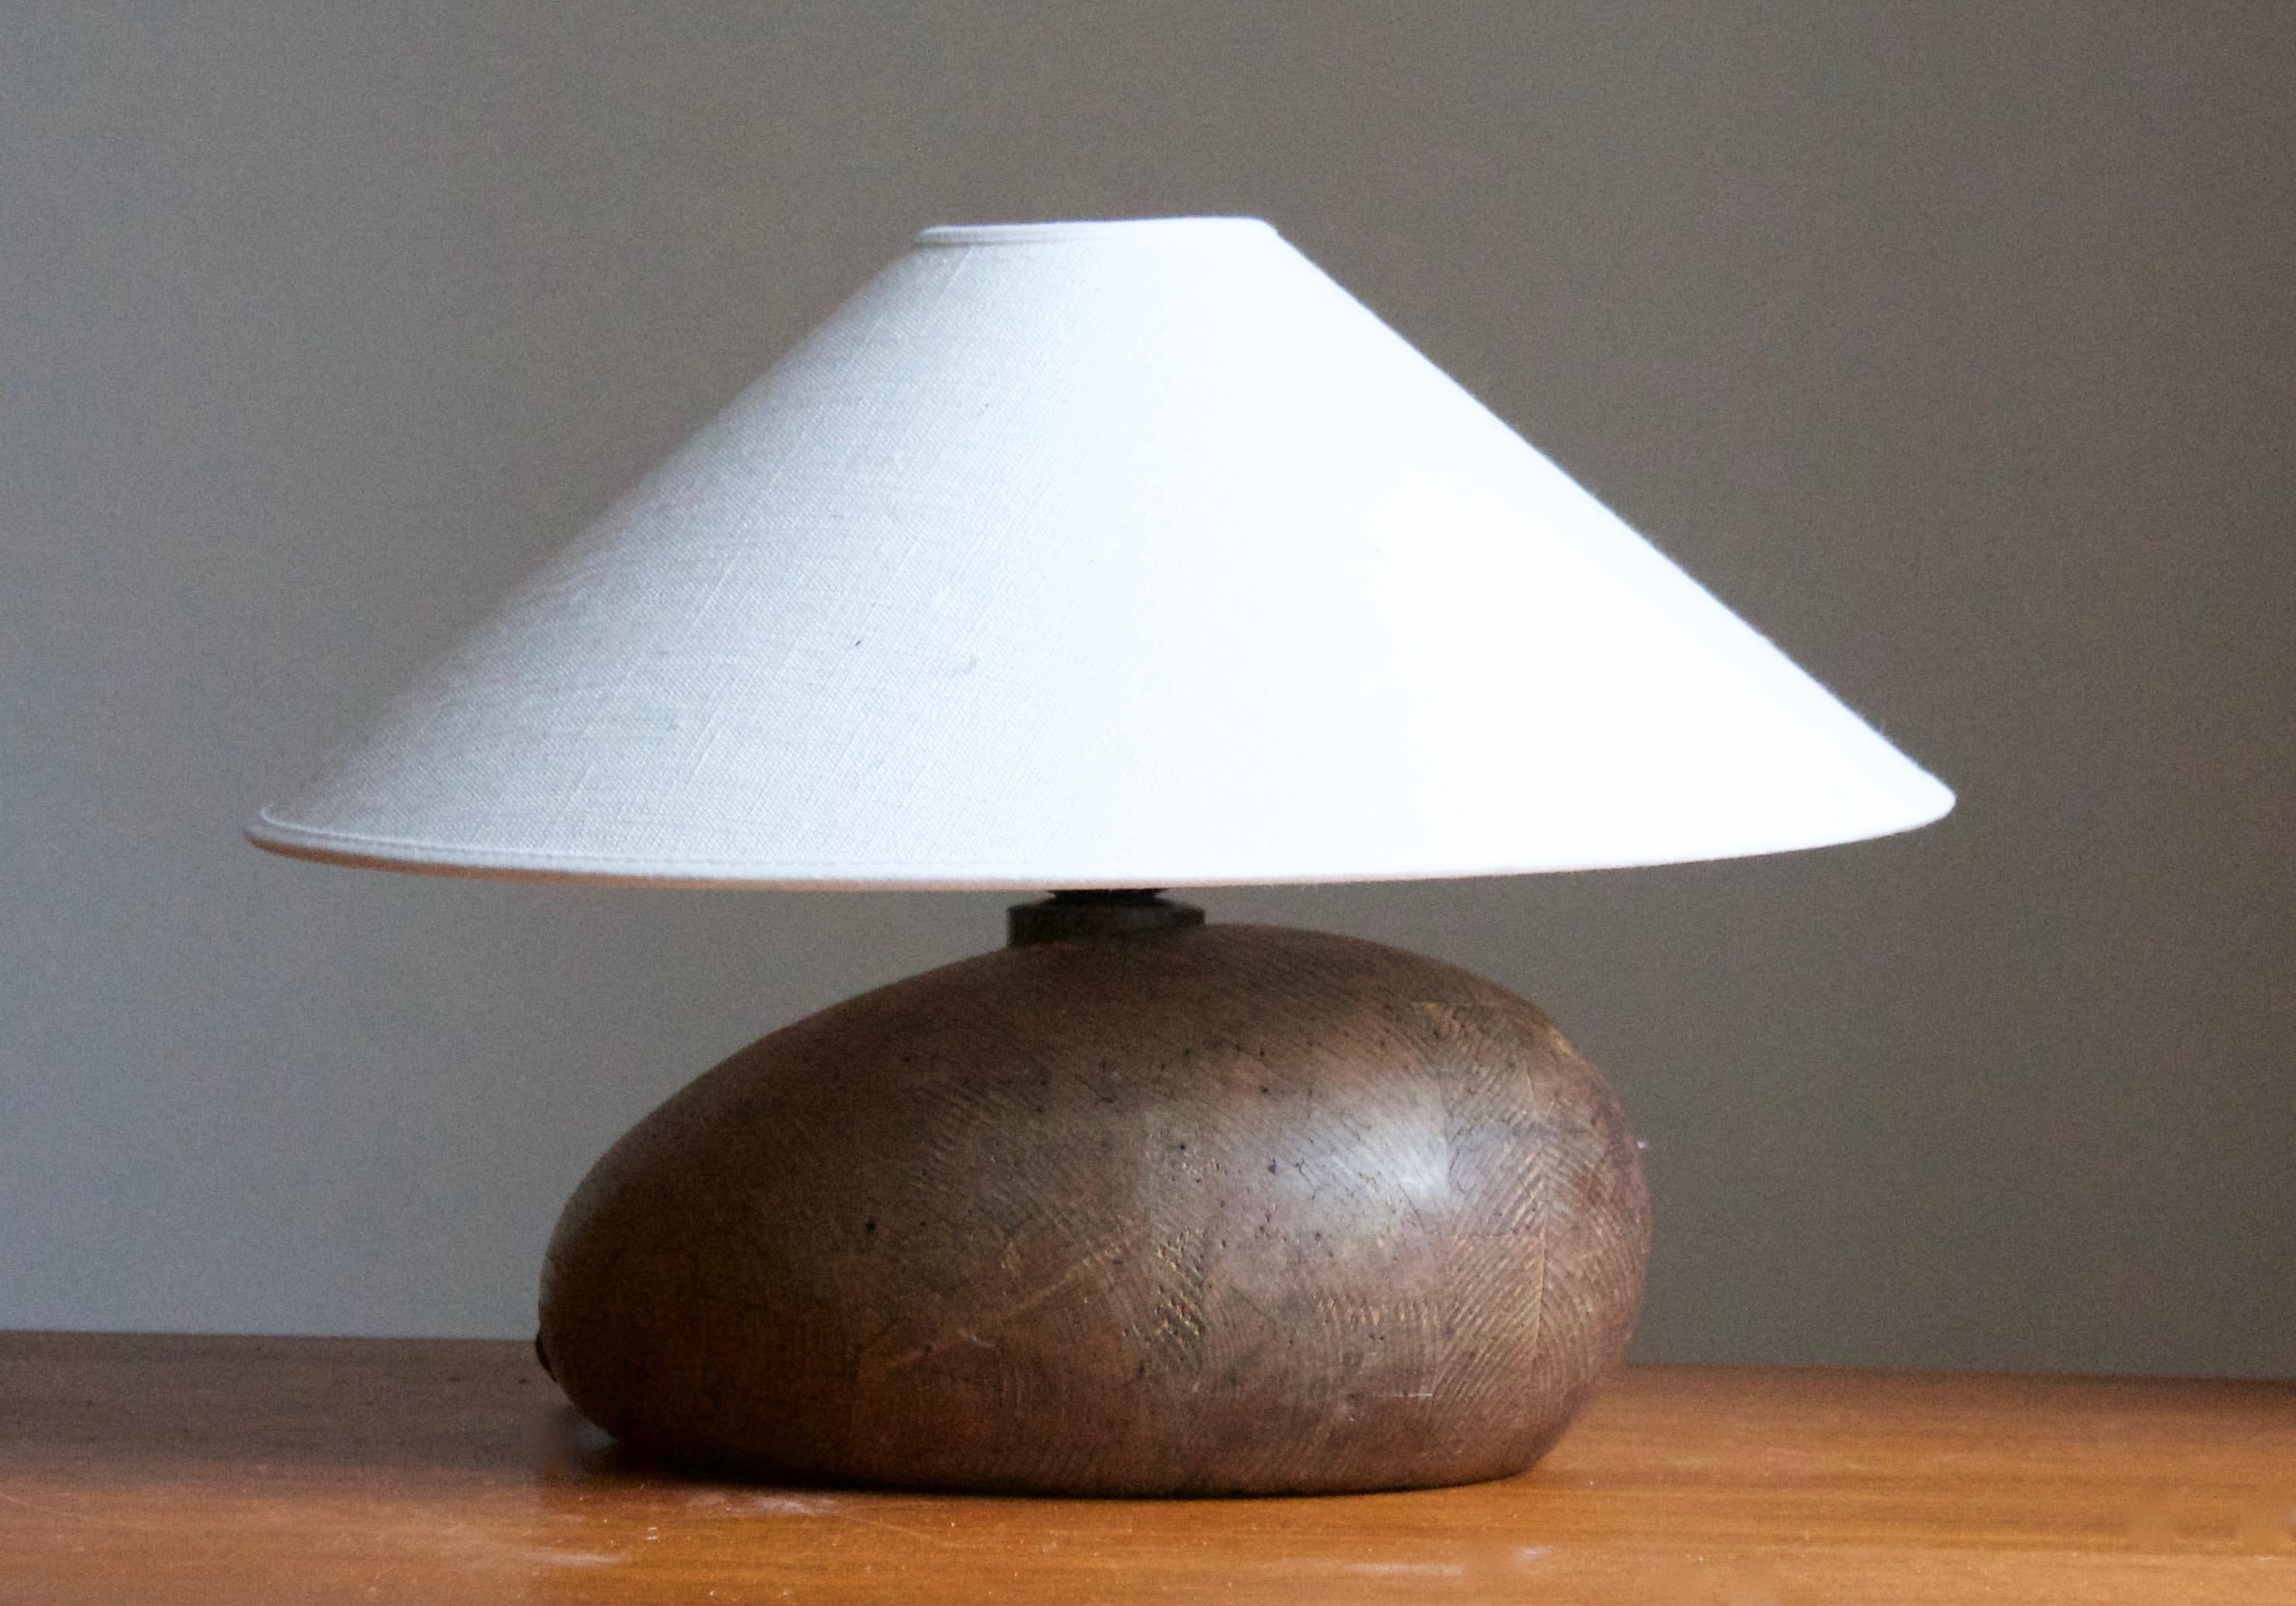 An organic shaped table lamp. Lamp mounted atop of organic wooden architectural element, Sweden, c. 1940s.

Stated dimensions exclude lampshade. Height includes socket. Shade is not included in purchase.